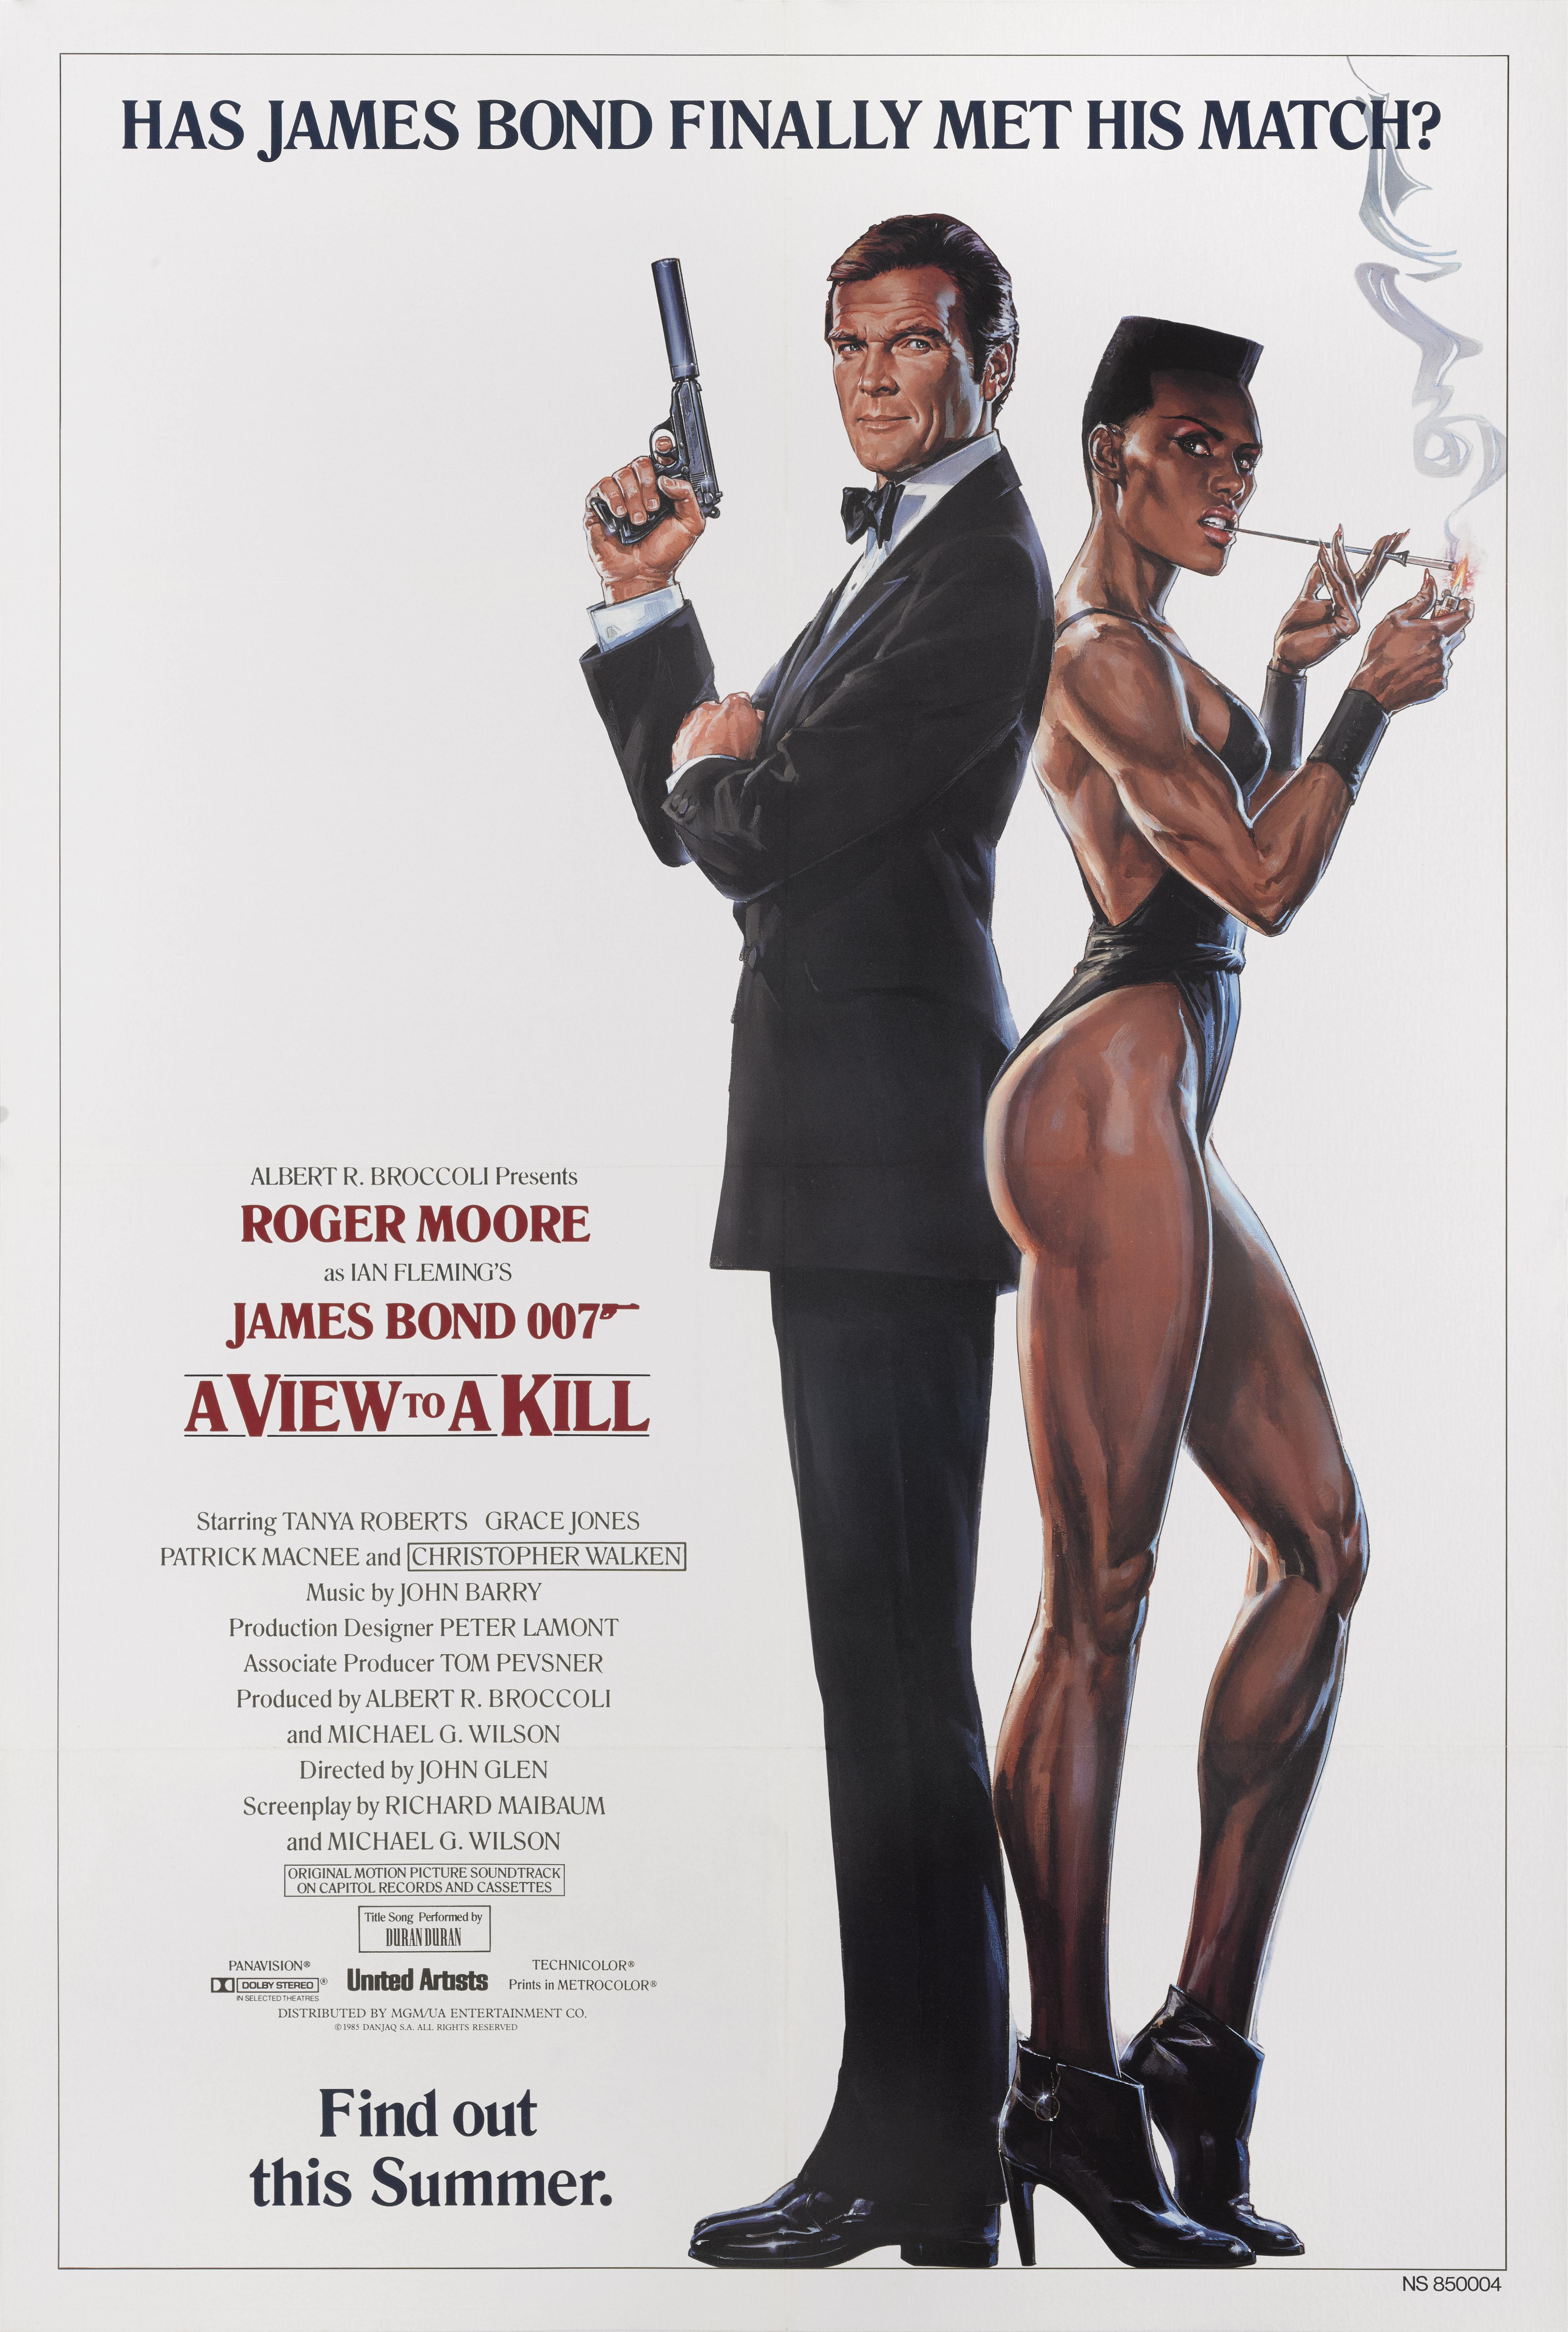 Original US Advance white style film poster for Roger Moore and Grace Jones 1985 Bond film.
This film was directed by John Glen.
This poster is conservation linen backed It would be shipped rolled in a strong tube and shipped by Federal Express.